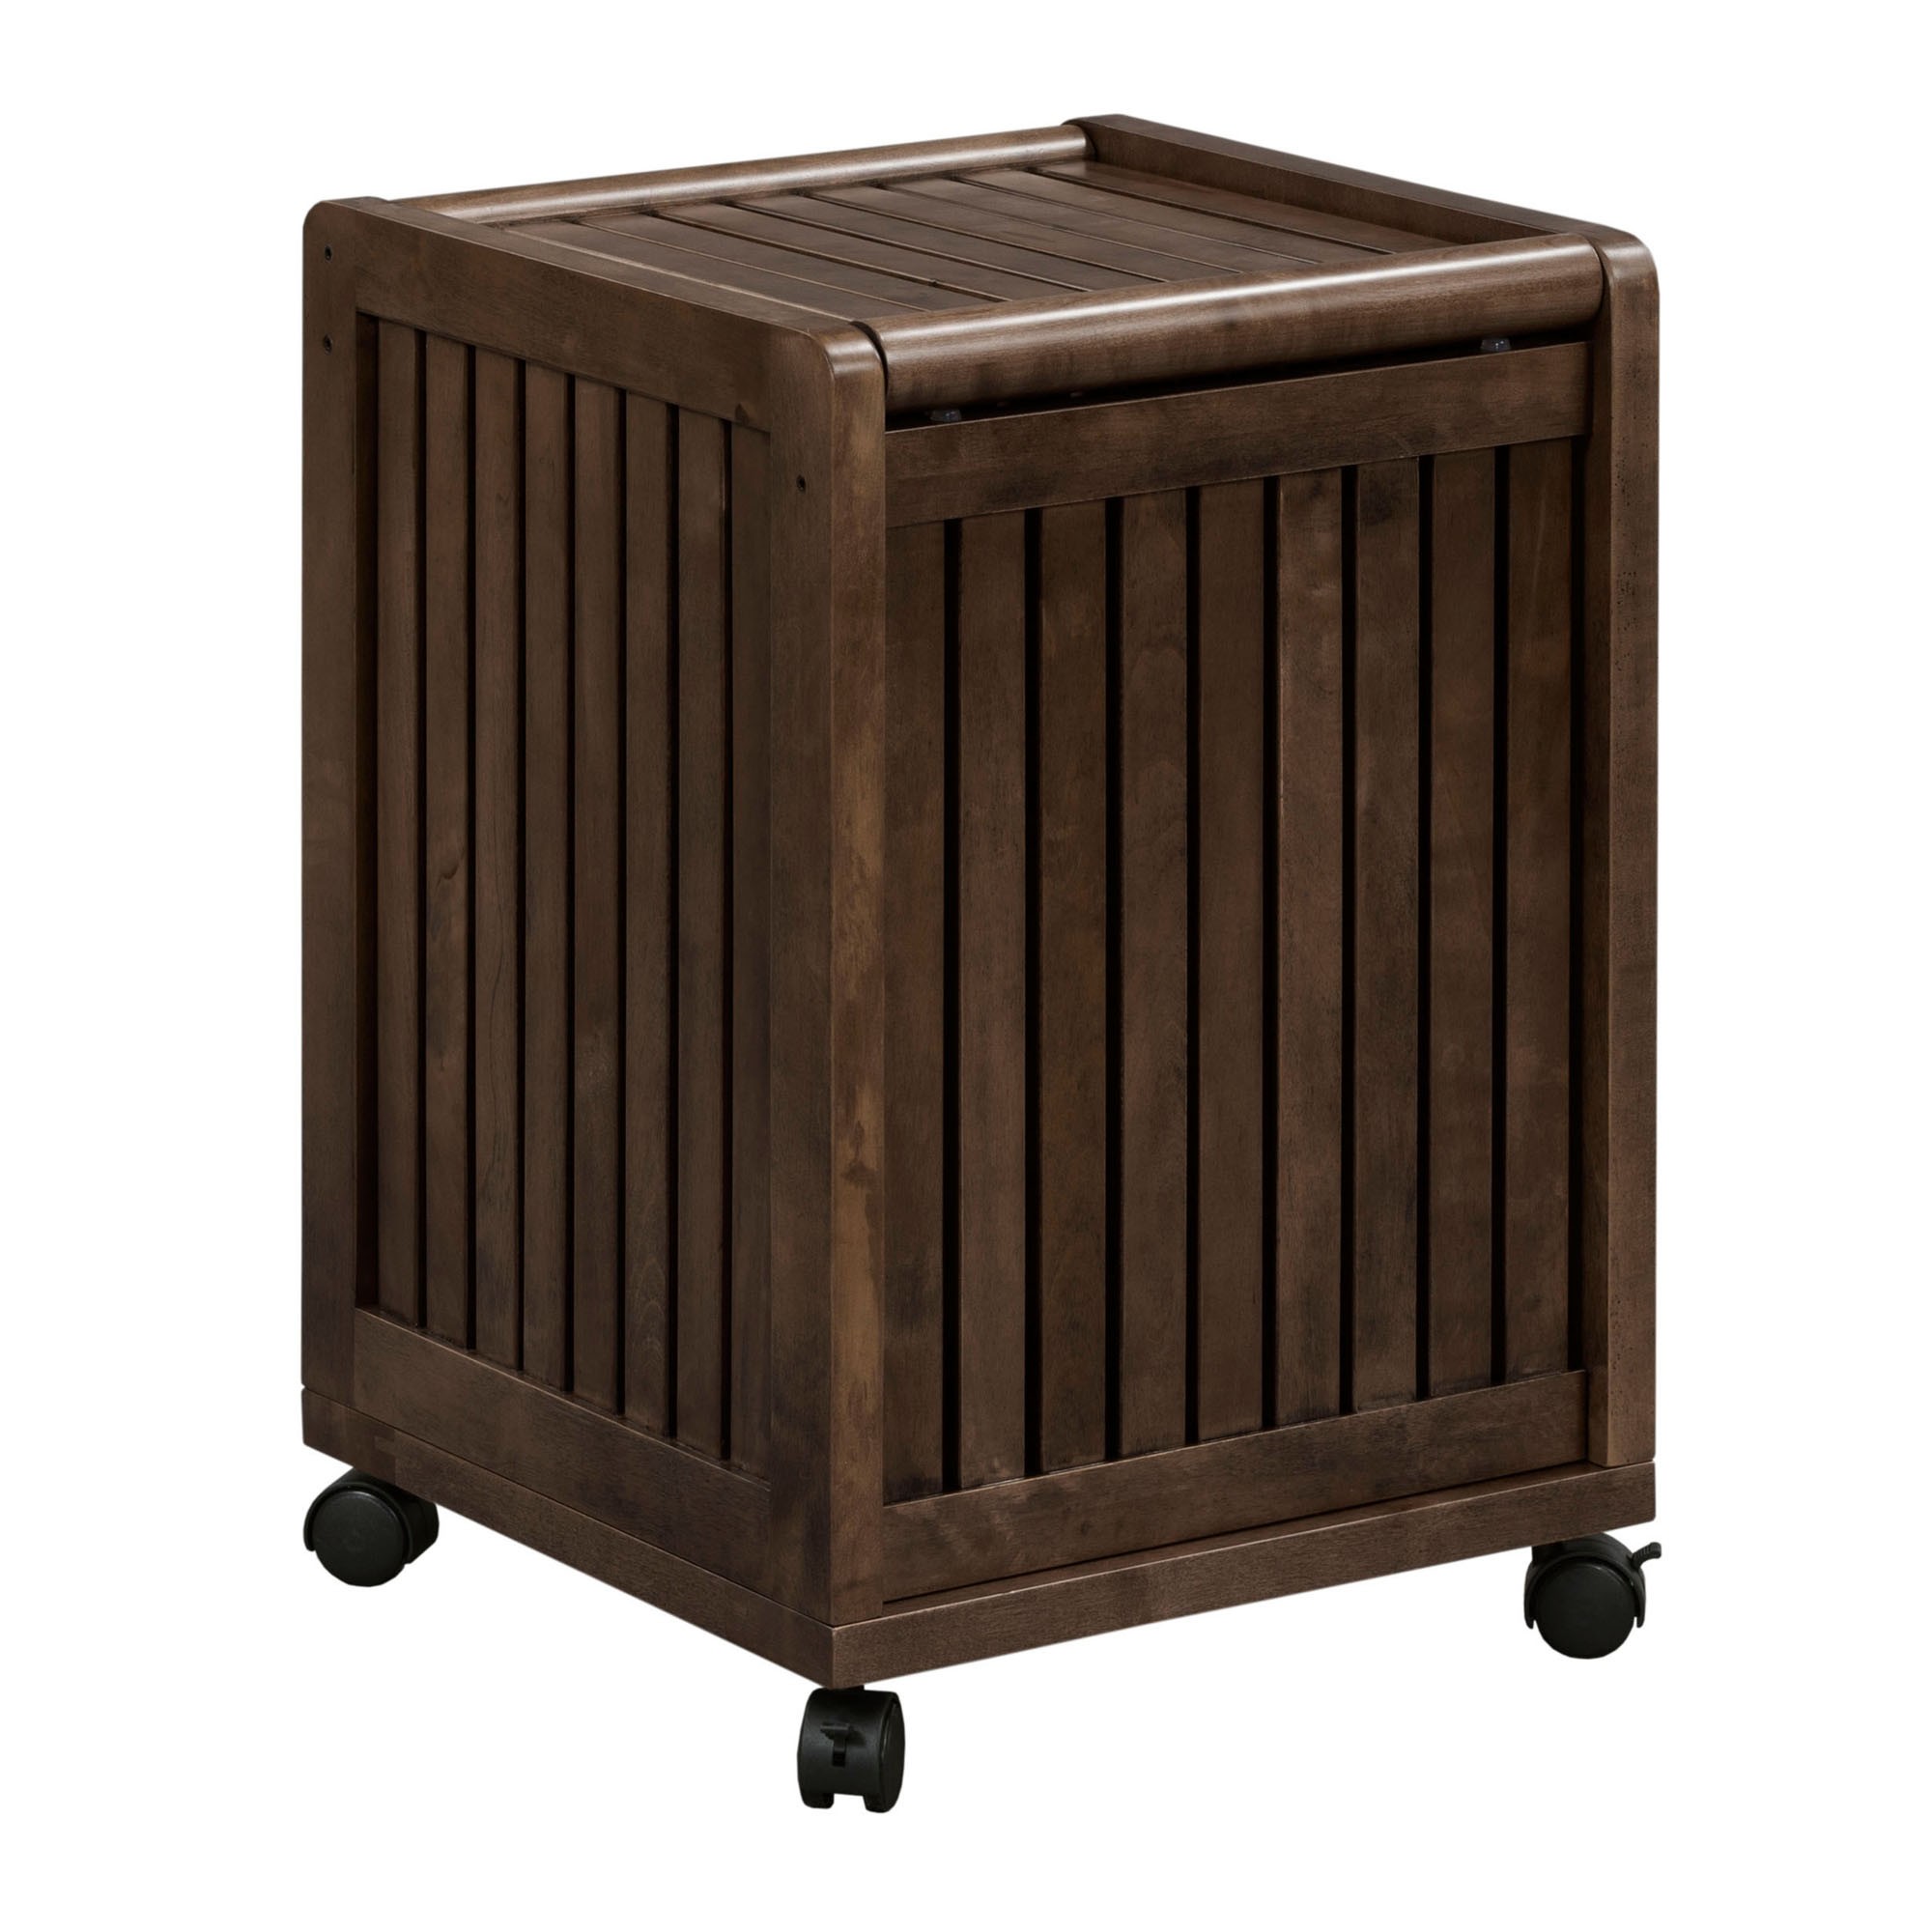 Espresso Solid Wood Rolling Laundry Hamper with Lid